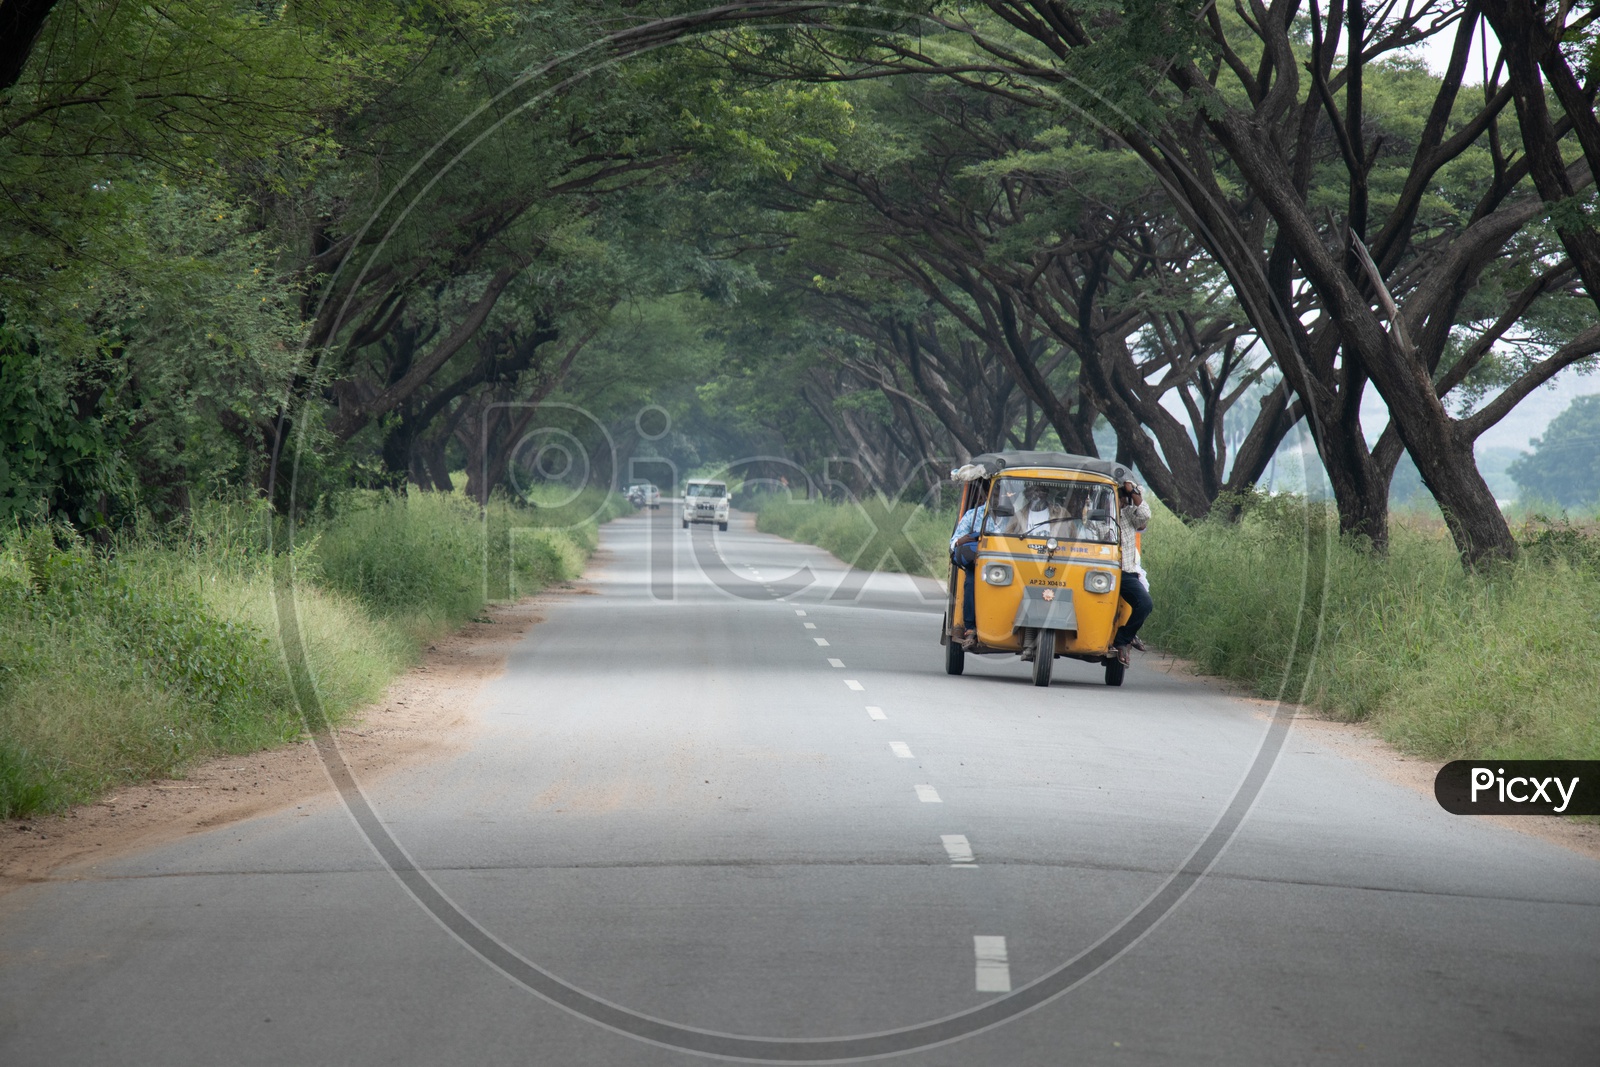 Autos Passing Through  The Canopy Of trees Over Rural Village Roads